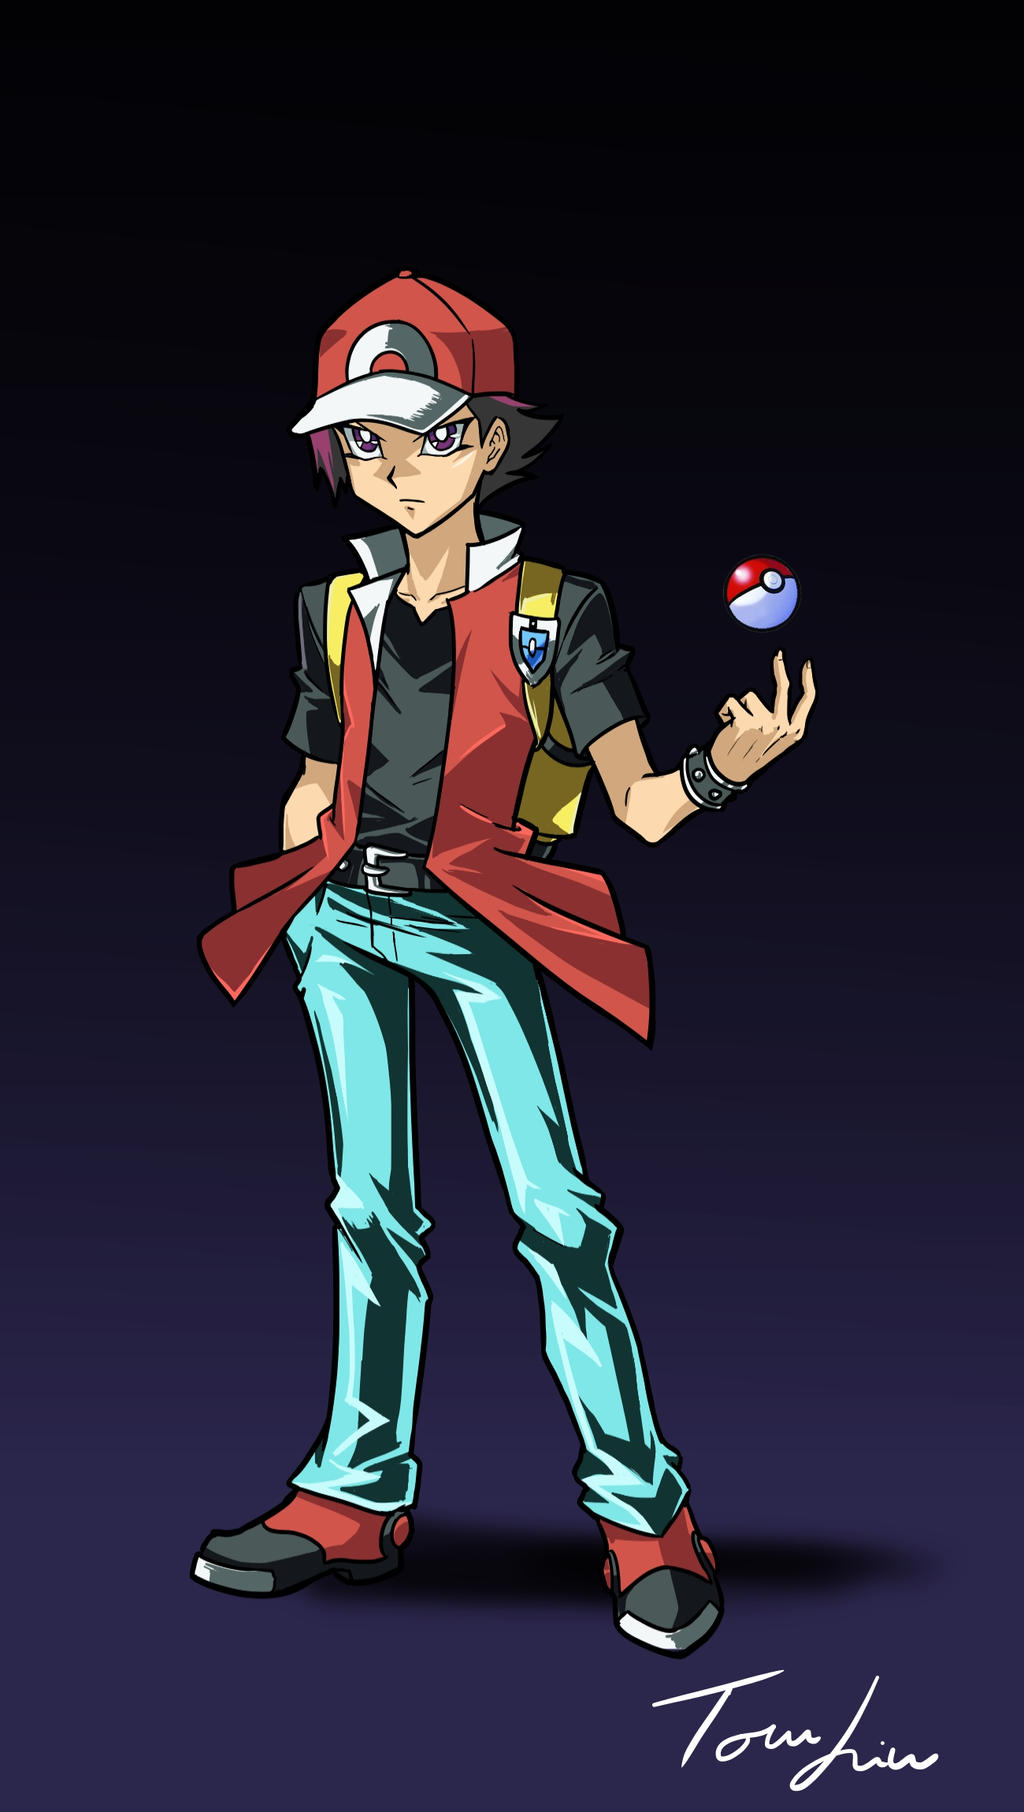 Red The Pokemon Trainer Pokemon trainer Red in Yu-gi-oh style by Shight on DeviantArt